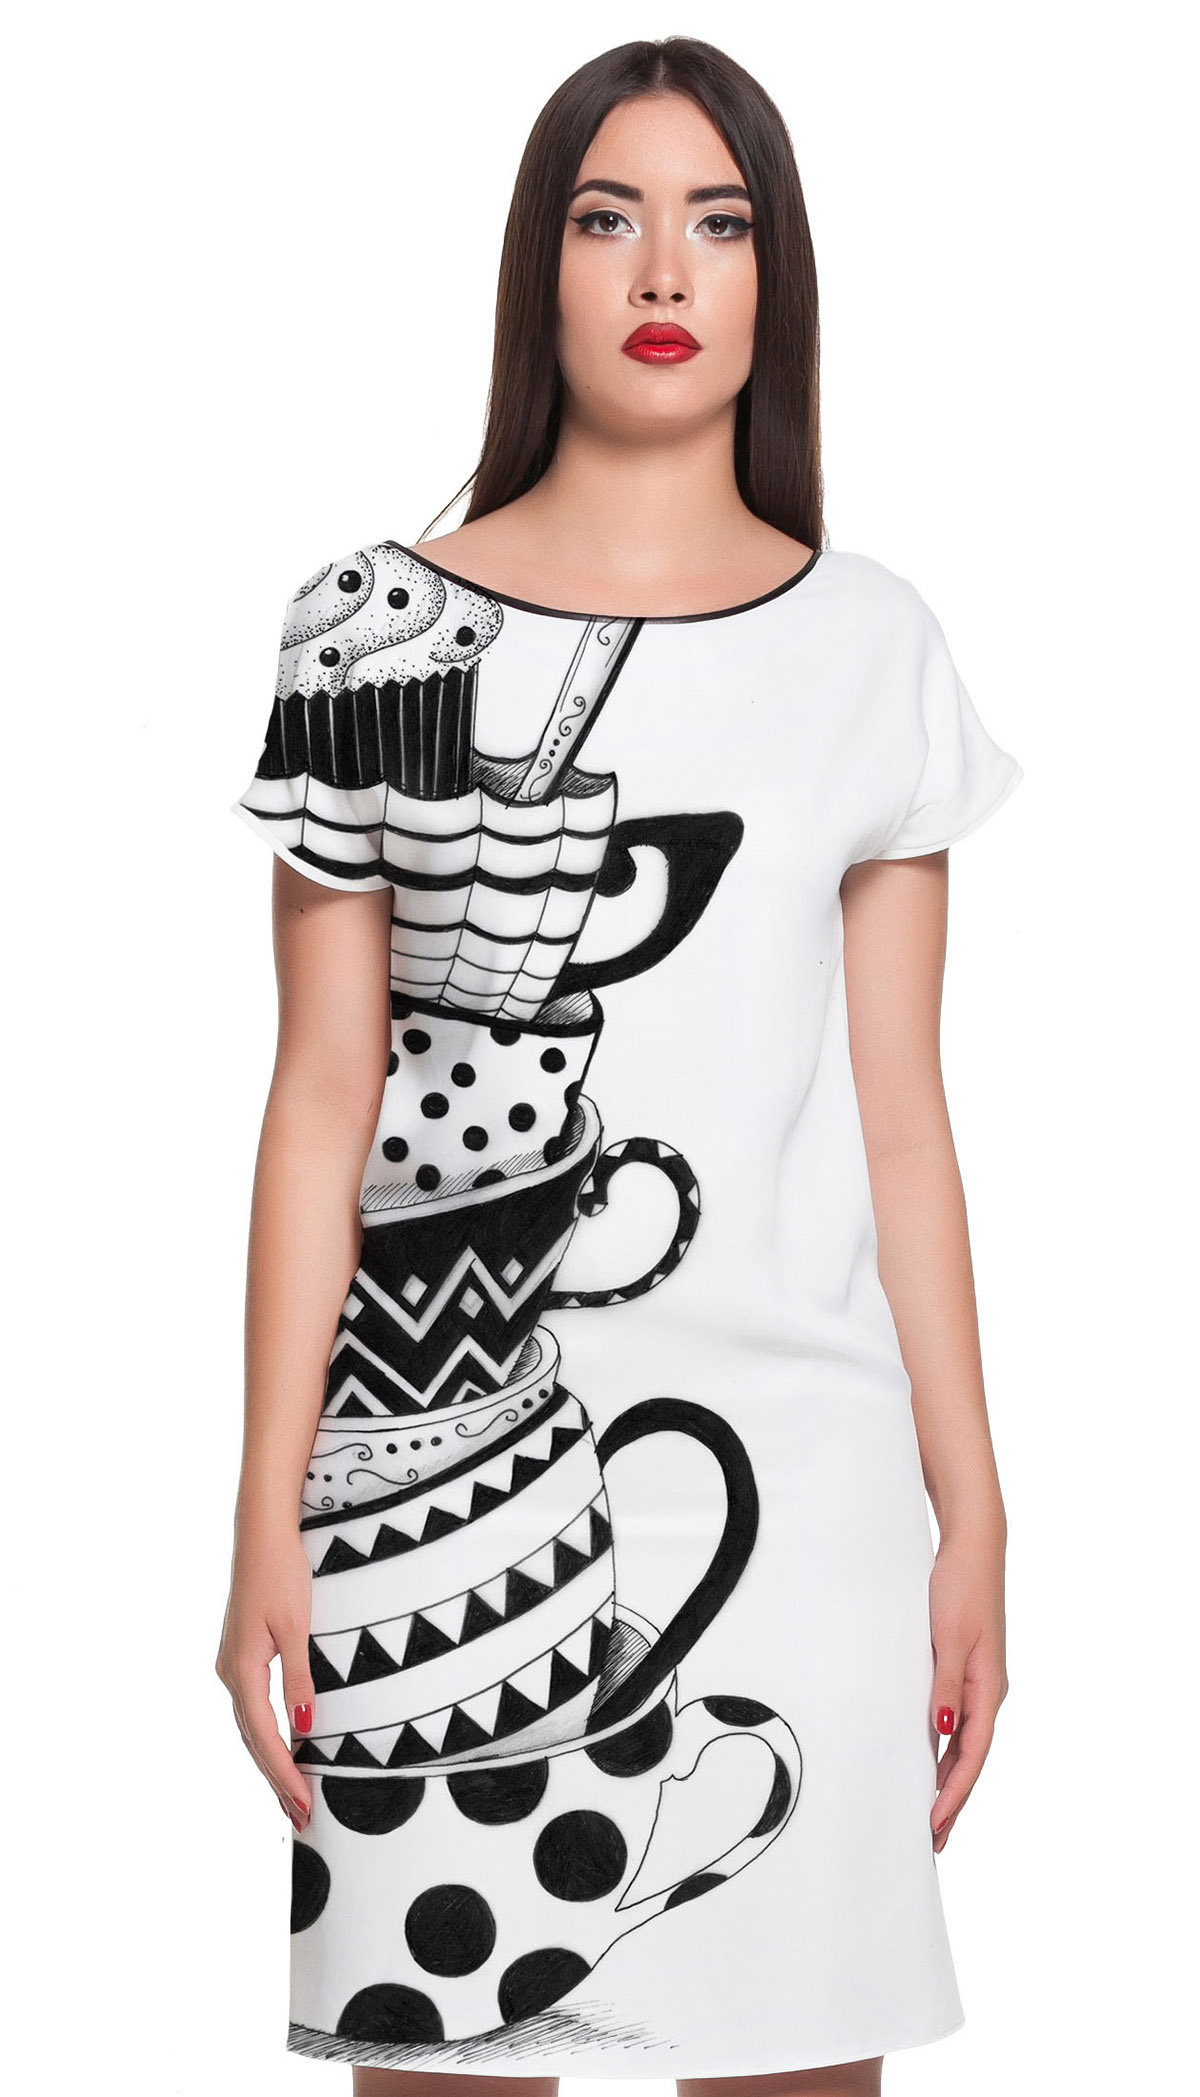 clothes dresses t-shirt black and white Collection skirt